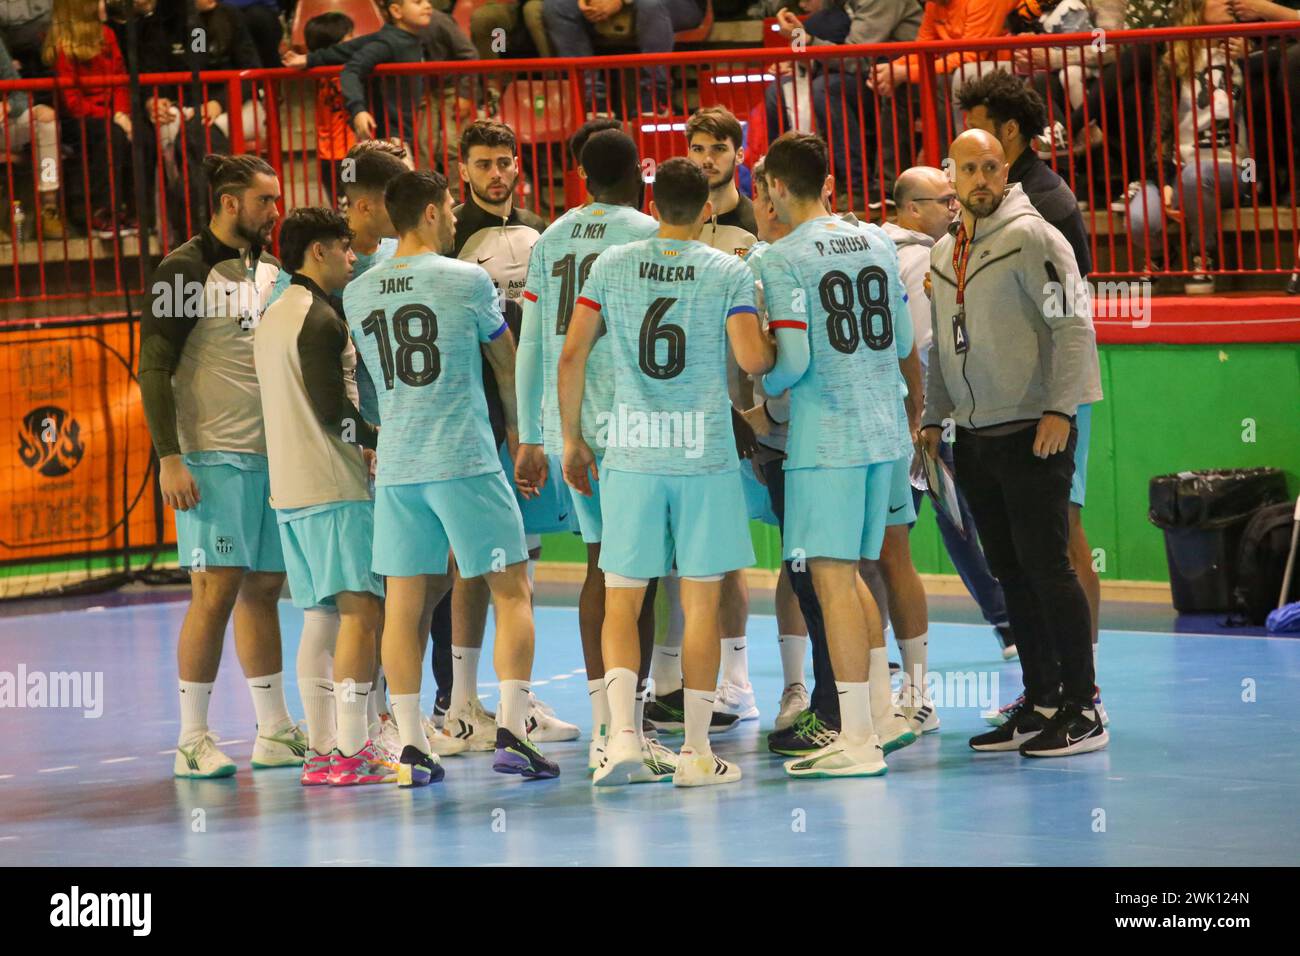 Torrelavega, Spain, February 17th, 2024: Barça players chat in a timeout during the 18th Matchday of the Plenitude League between Bathco BM. Torrelavega and Barça, on February 17, 2024, at the Vicente Trueba Municipal Pavilion in Torrelavega, Spain. Credit: Alberto Brevers / Alamy Live News. Stock Photo